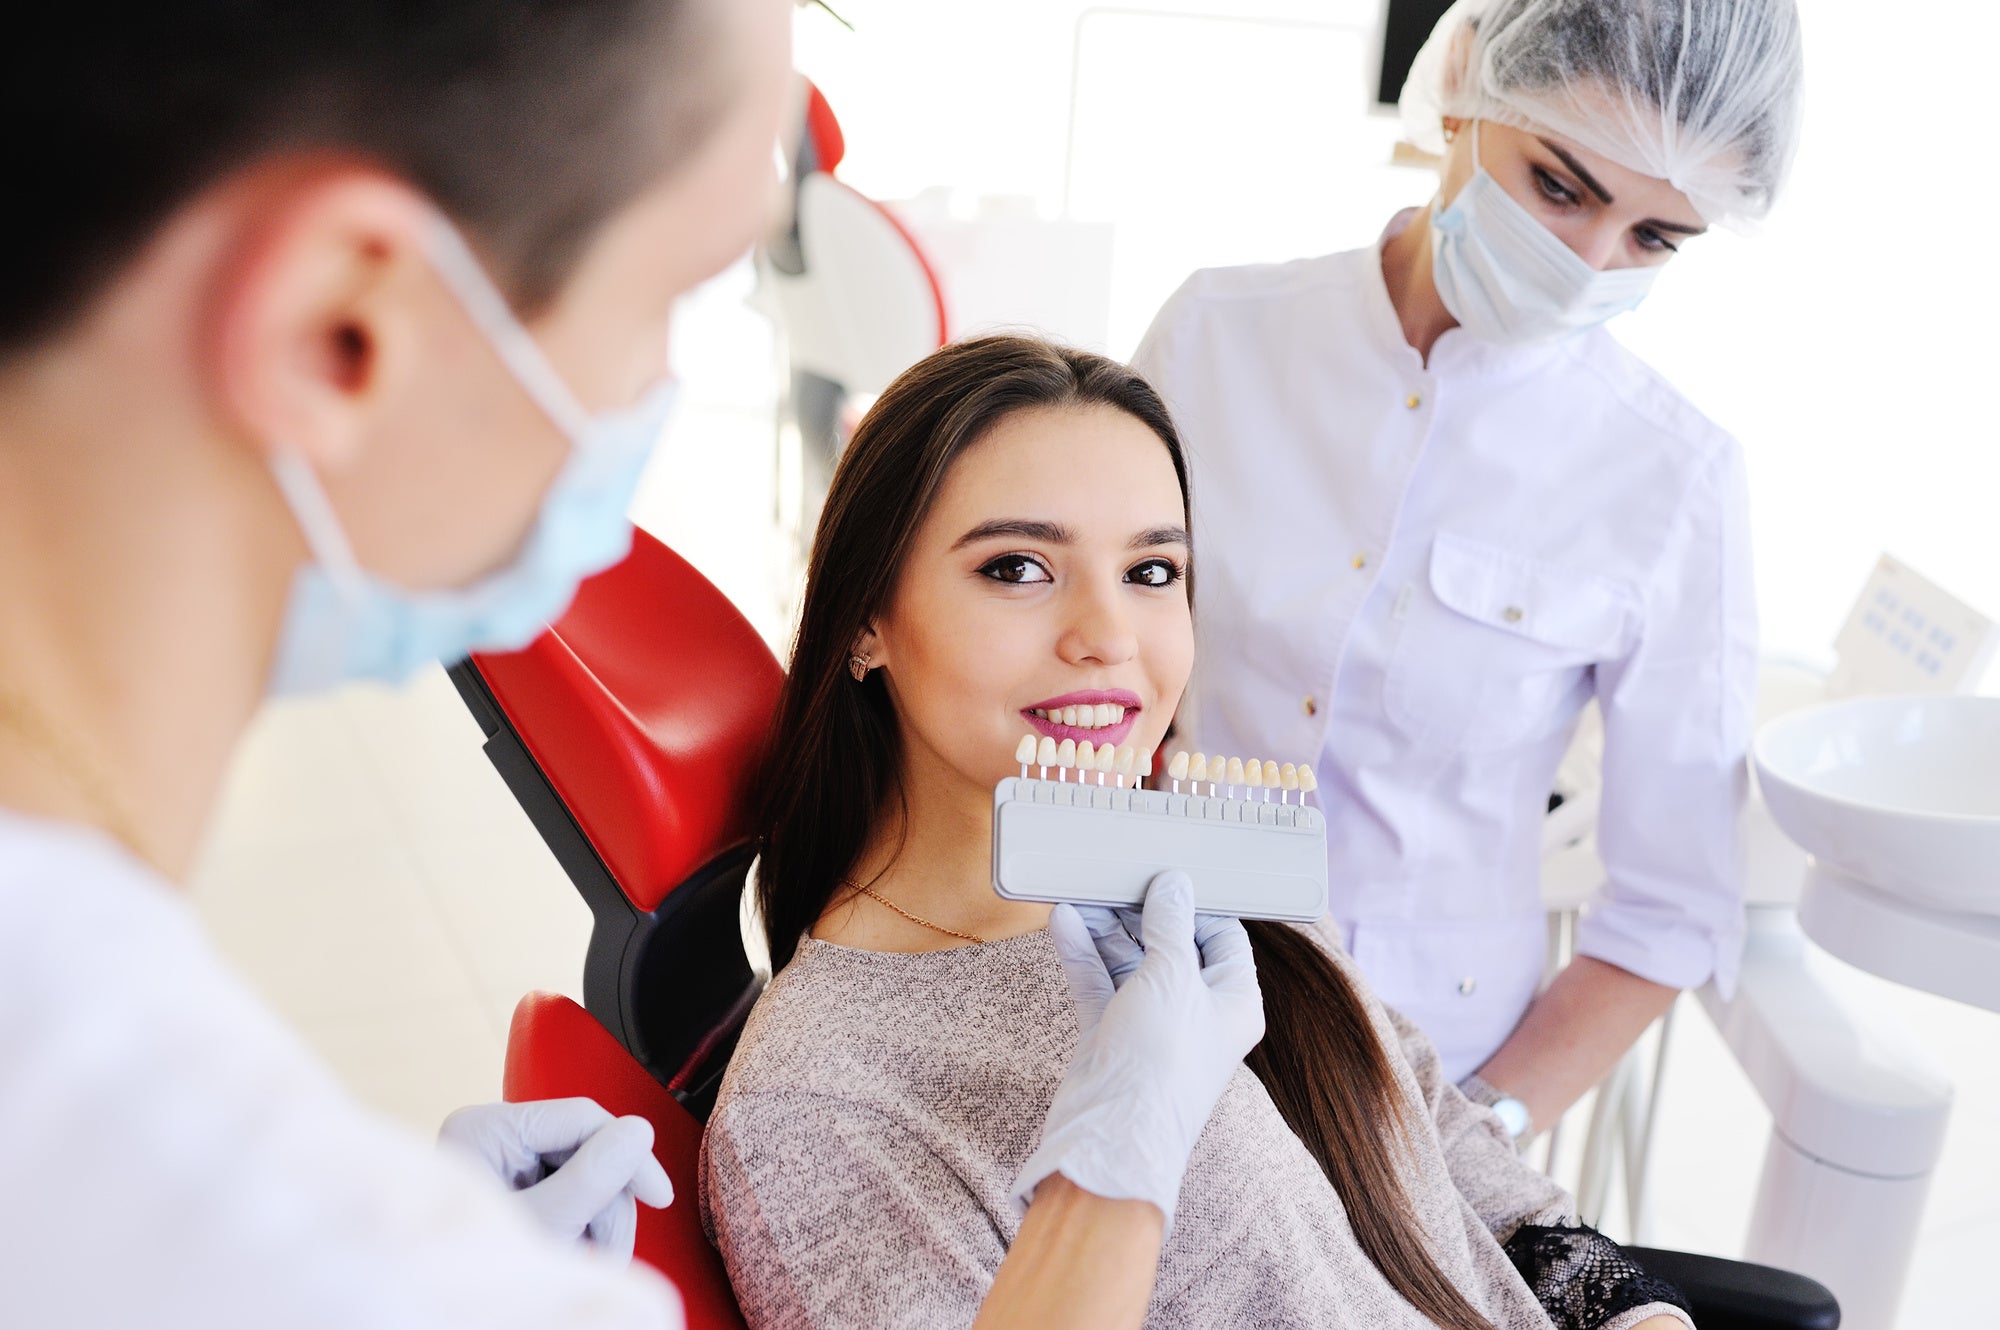 5 Excellent Treatment Options for Broken or Chipped Teeth